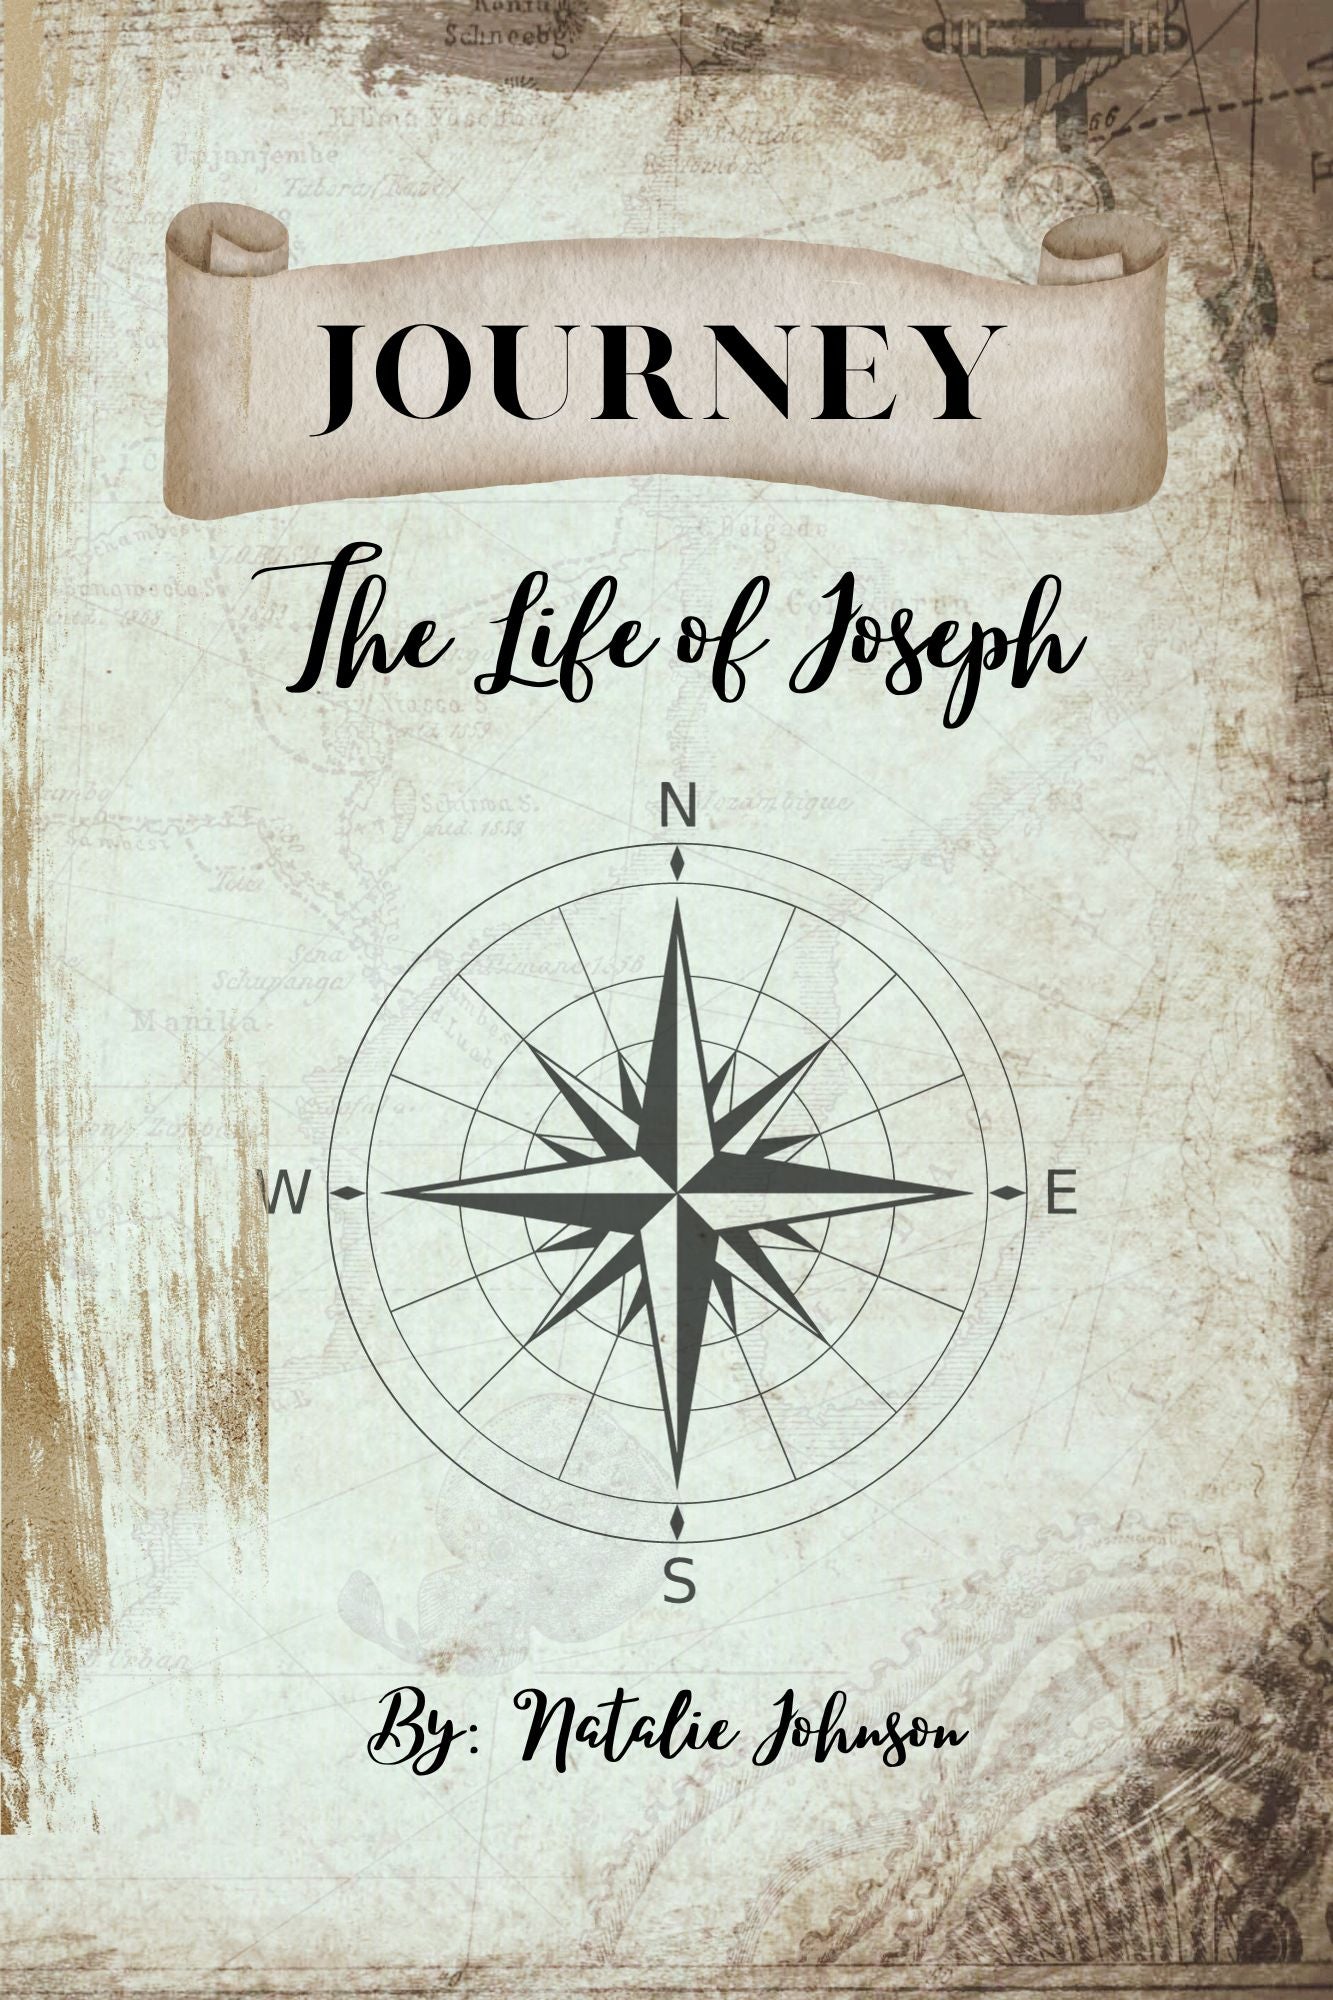 Book Review - Journey: The Life of Joseph